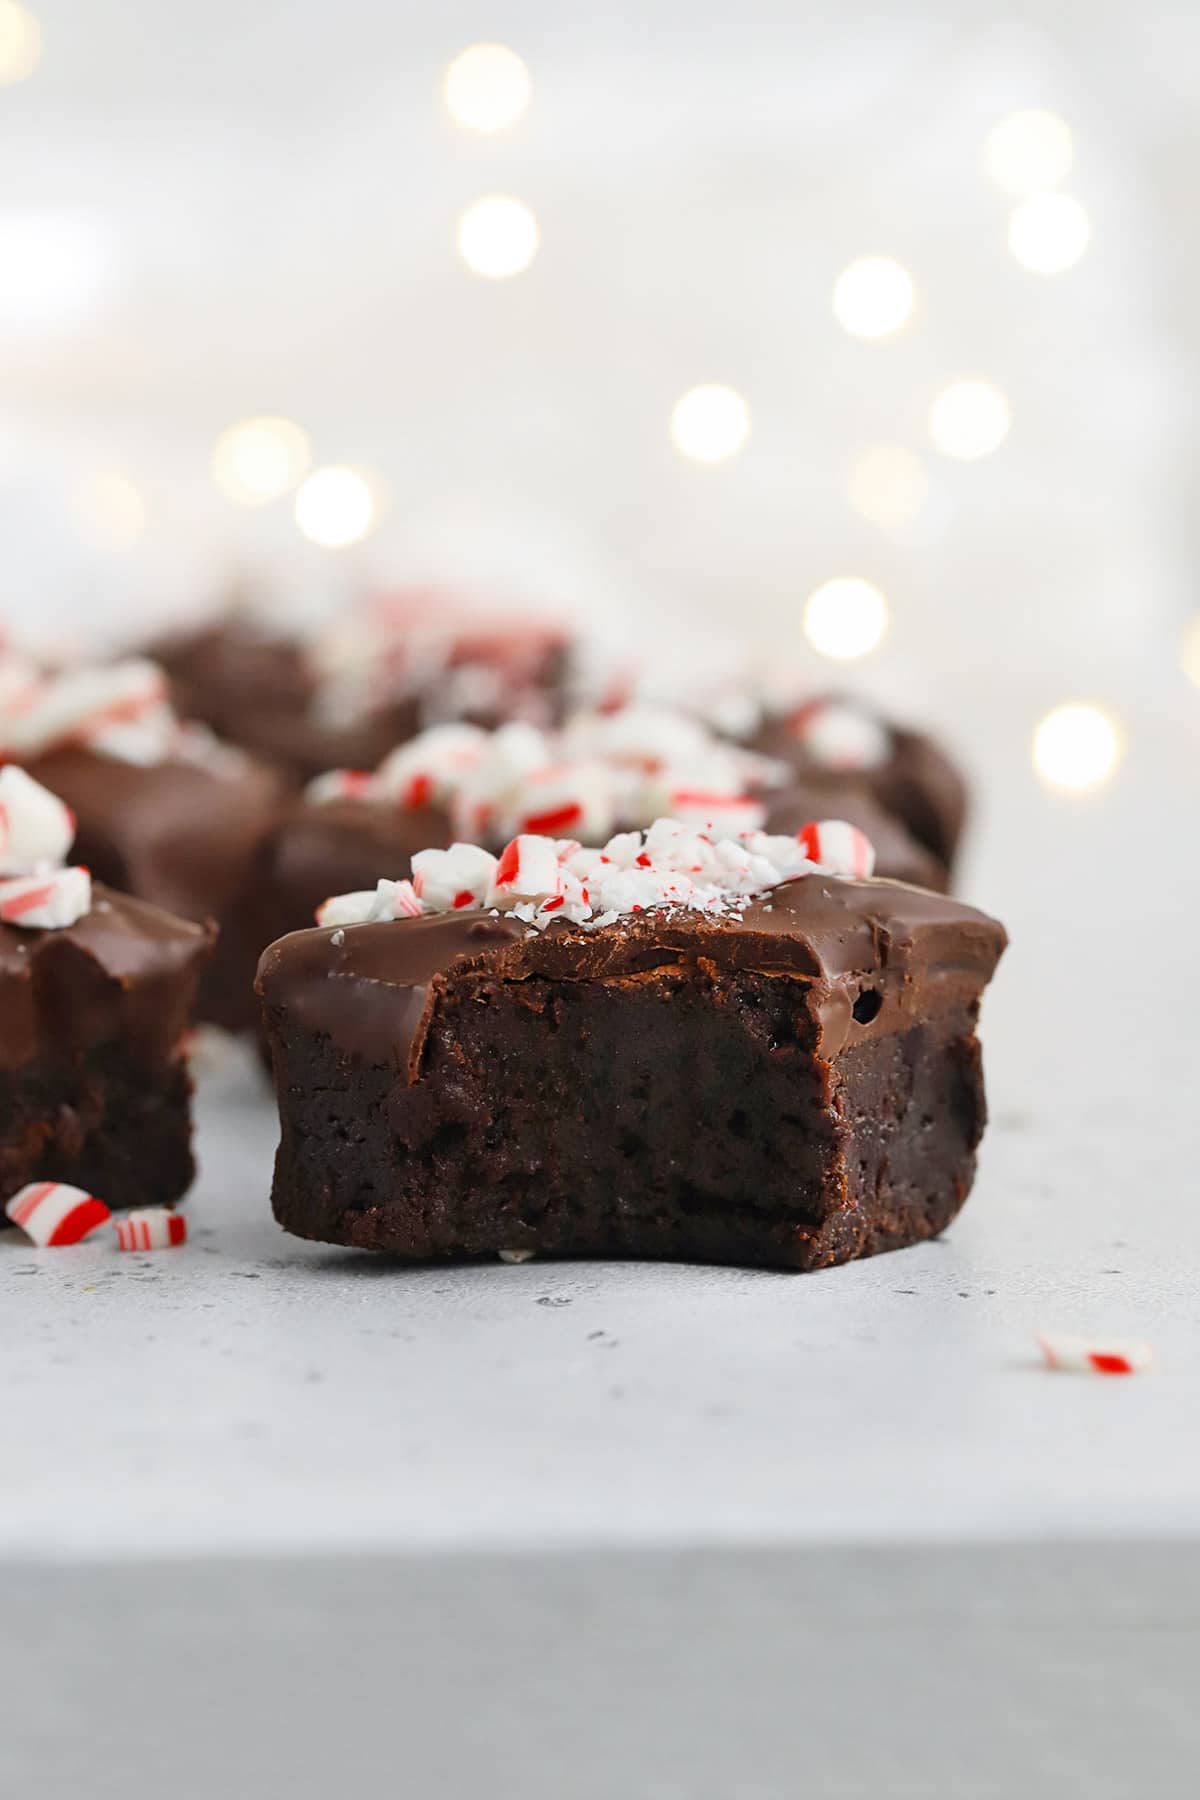 Front view of gluten-free peppermint brownie bites. One brownie bite has a bite taken out of it, revealing a fudgy center